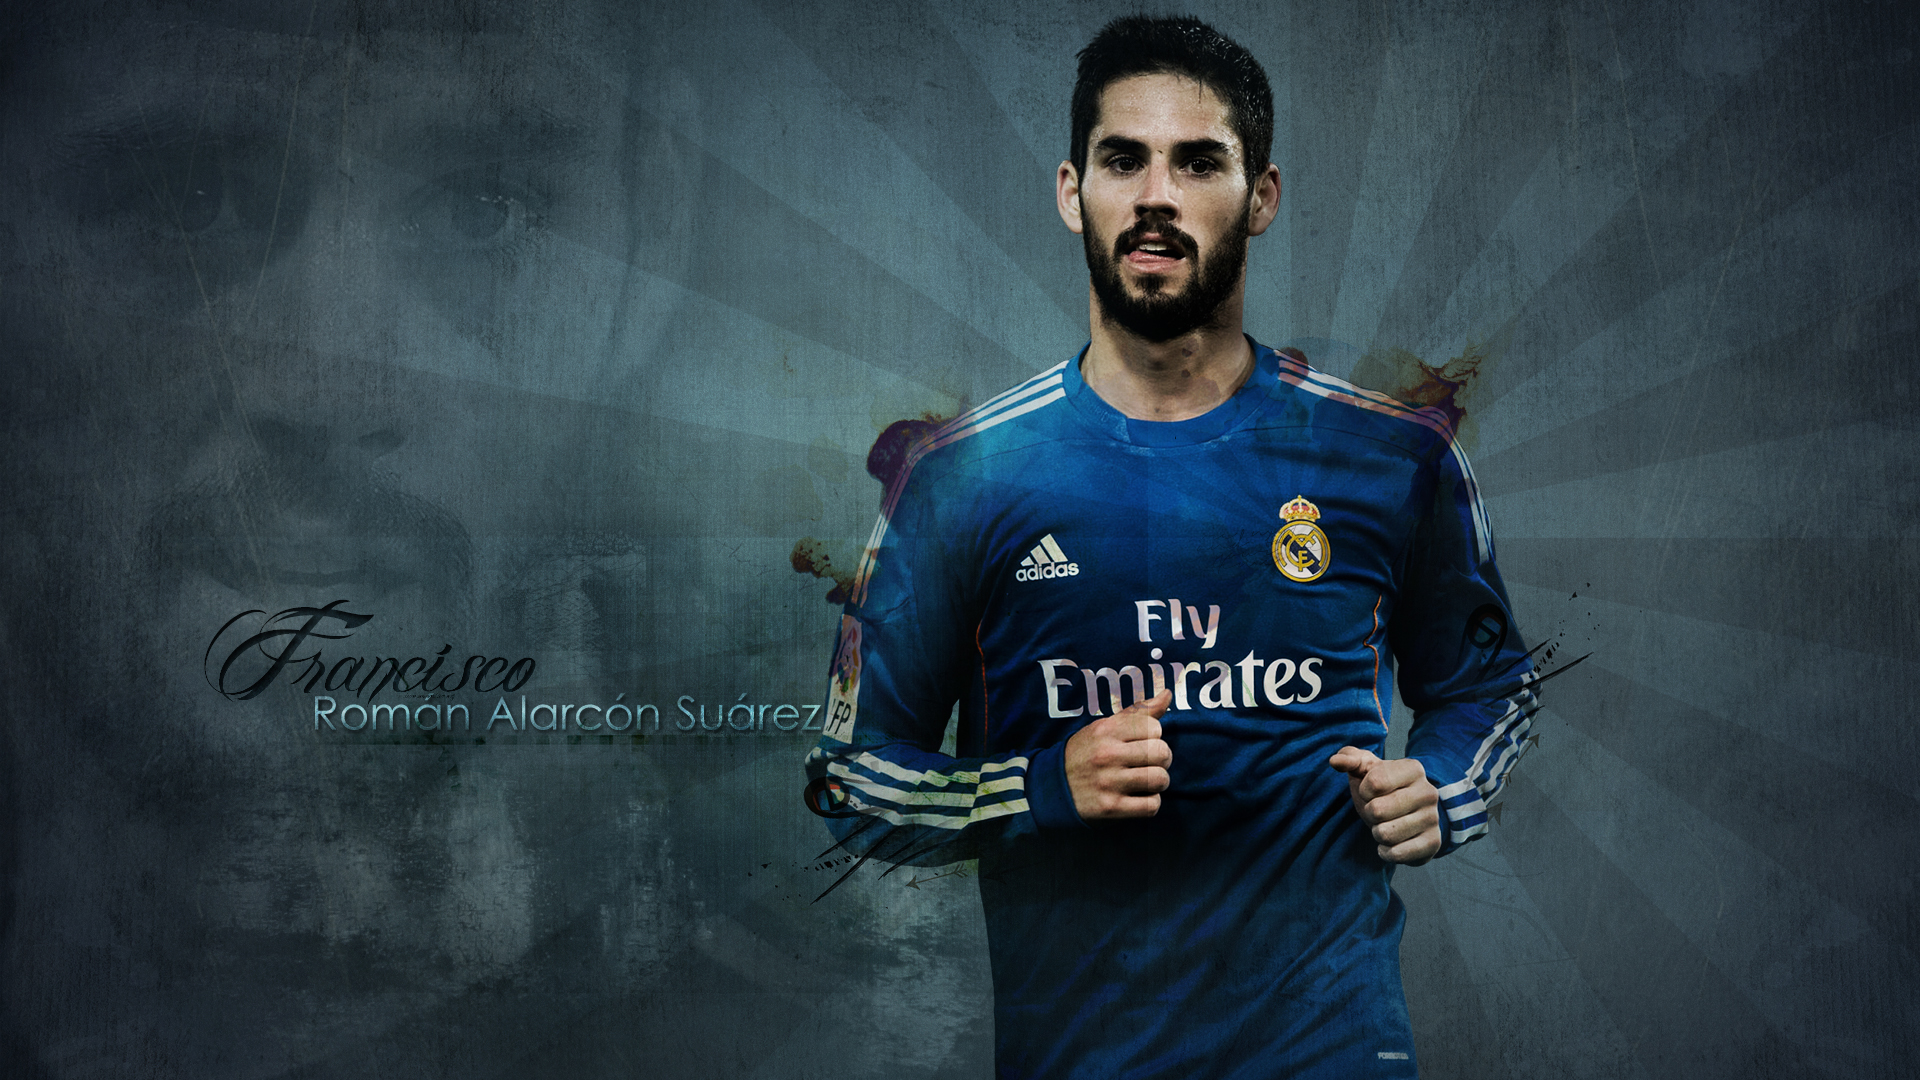 Isco Alarcón “Prince of Madrid” wallpaper, you like it?